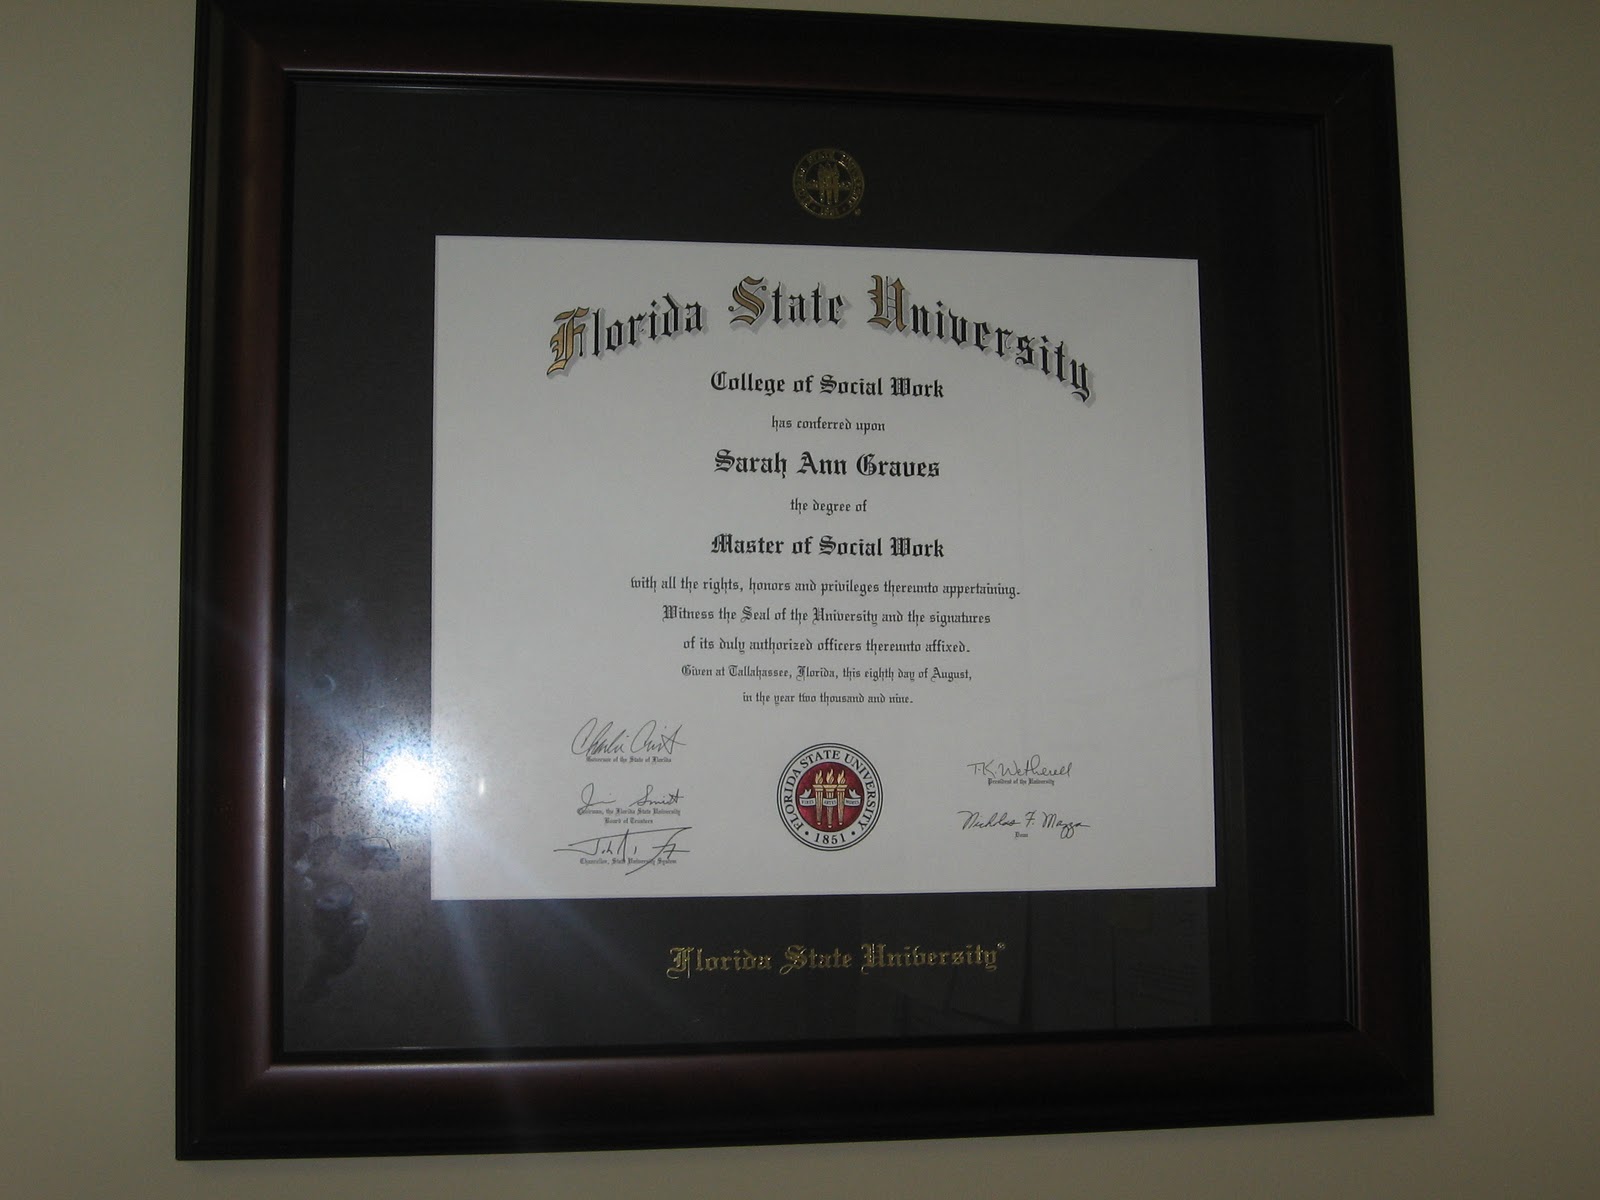 ... this , it takes me 6 months of work to pay for this piece of paper